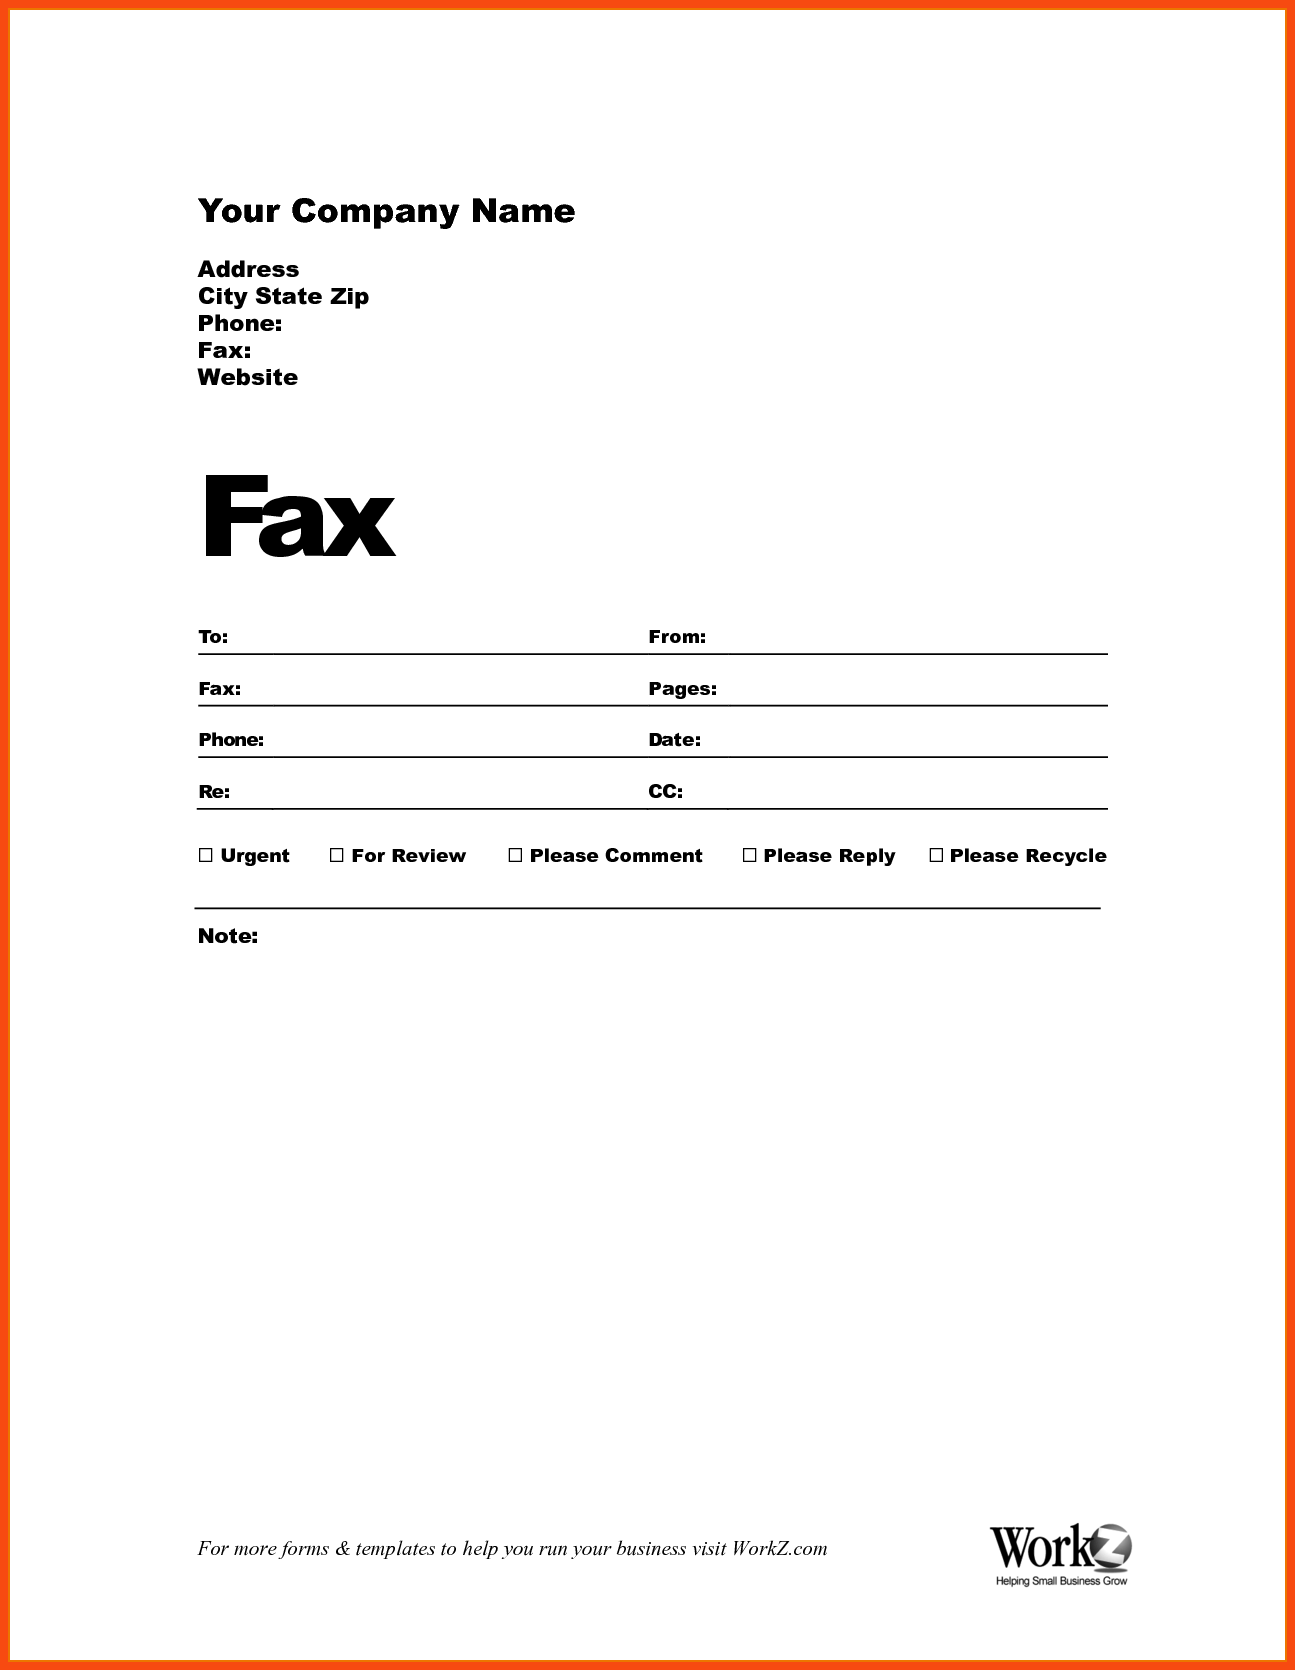 36-new-image-printable-fax-sheet-cover-letter-free-printable